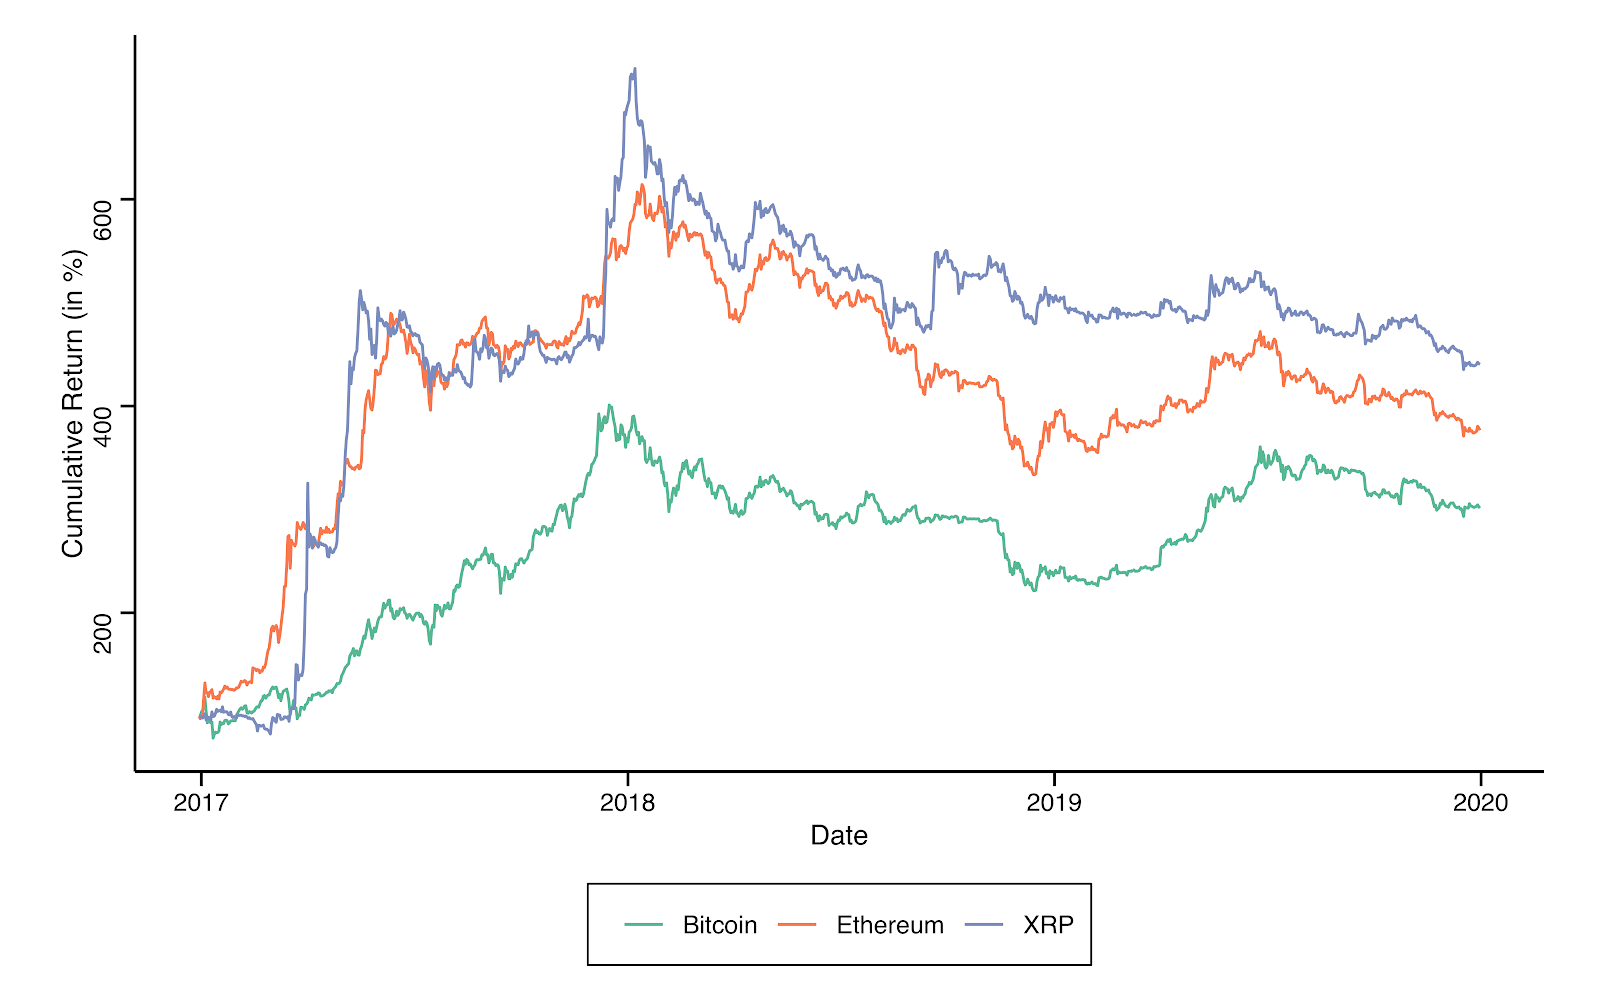 January 2017–December 2019 cumulative returns for the top three cryptocurrencies (Bitcoin, Ether and XRP)